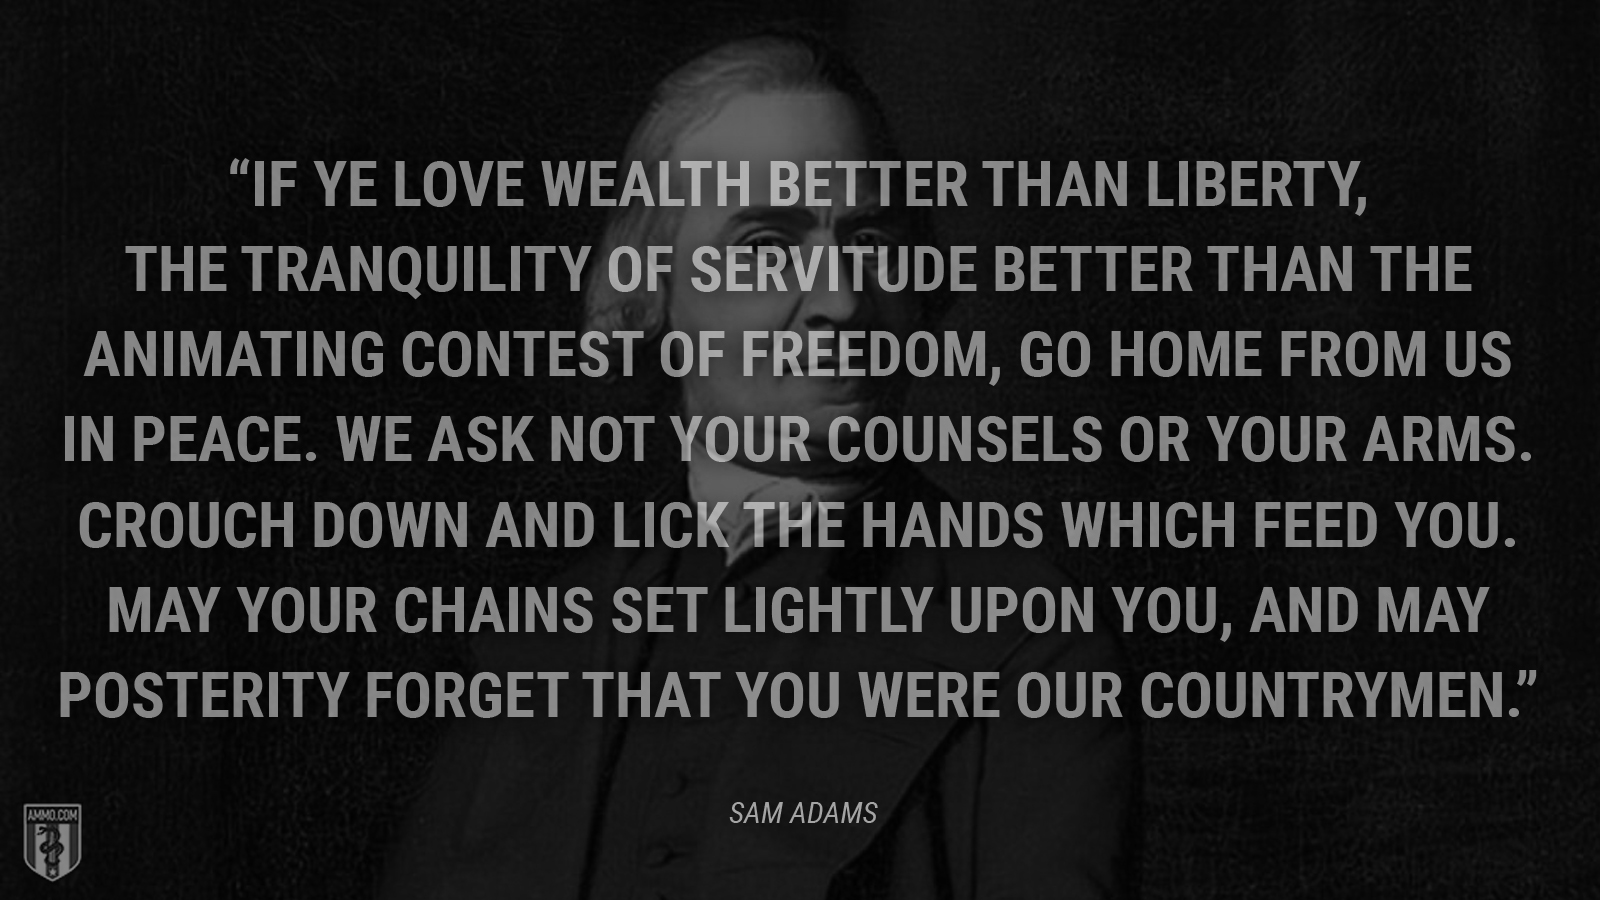 “If ye love wealth better than liberty, the tranquility of servitude better than the animating contest of freedom, go home from us in peace. We ask not your counsels or your arms. Crouch down and lick the hands which feed you. May your chains set lightly upon you, and may posterity forget that you were our countrymen.” - Sam Adams